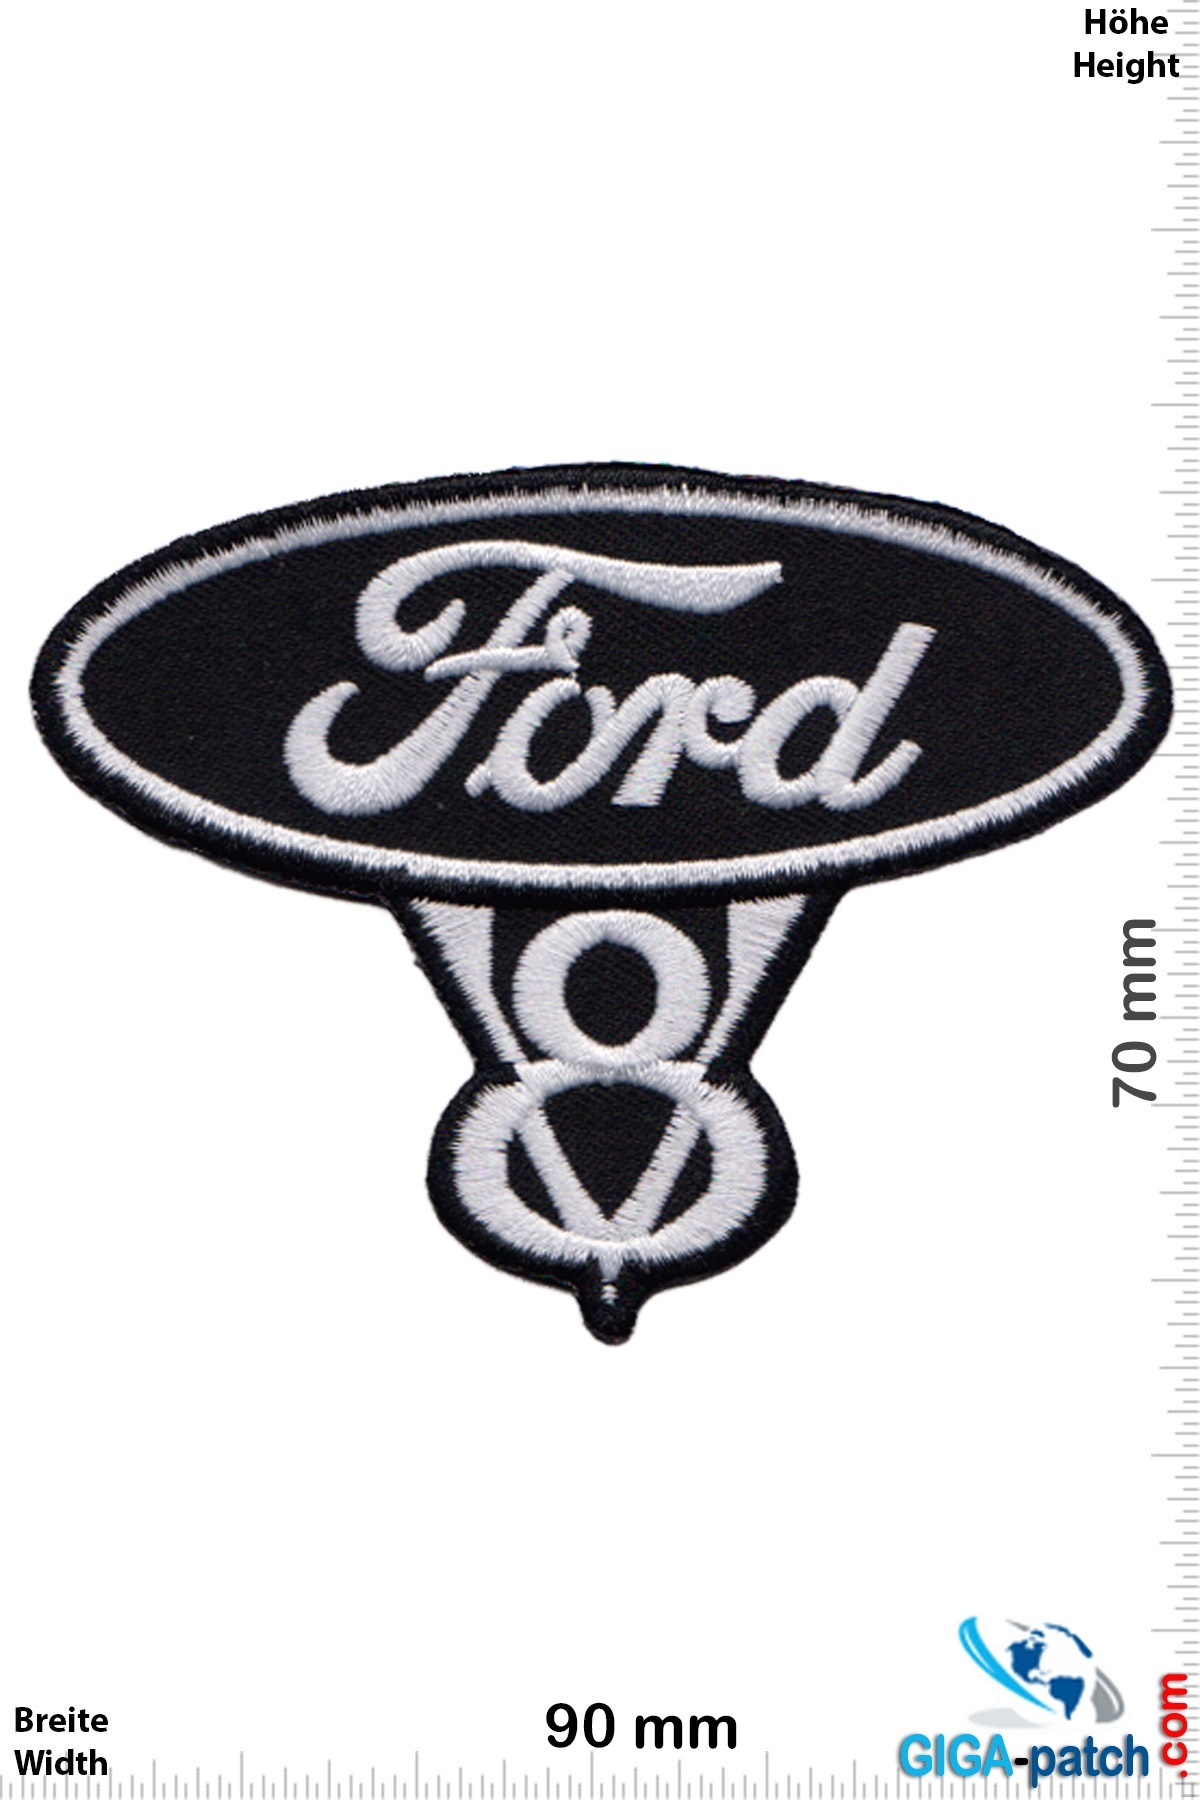 Ford - FORD V8 - black silver- Patch- Aufnäher